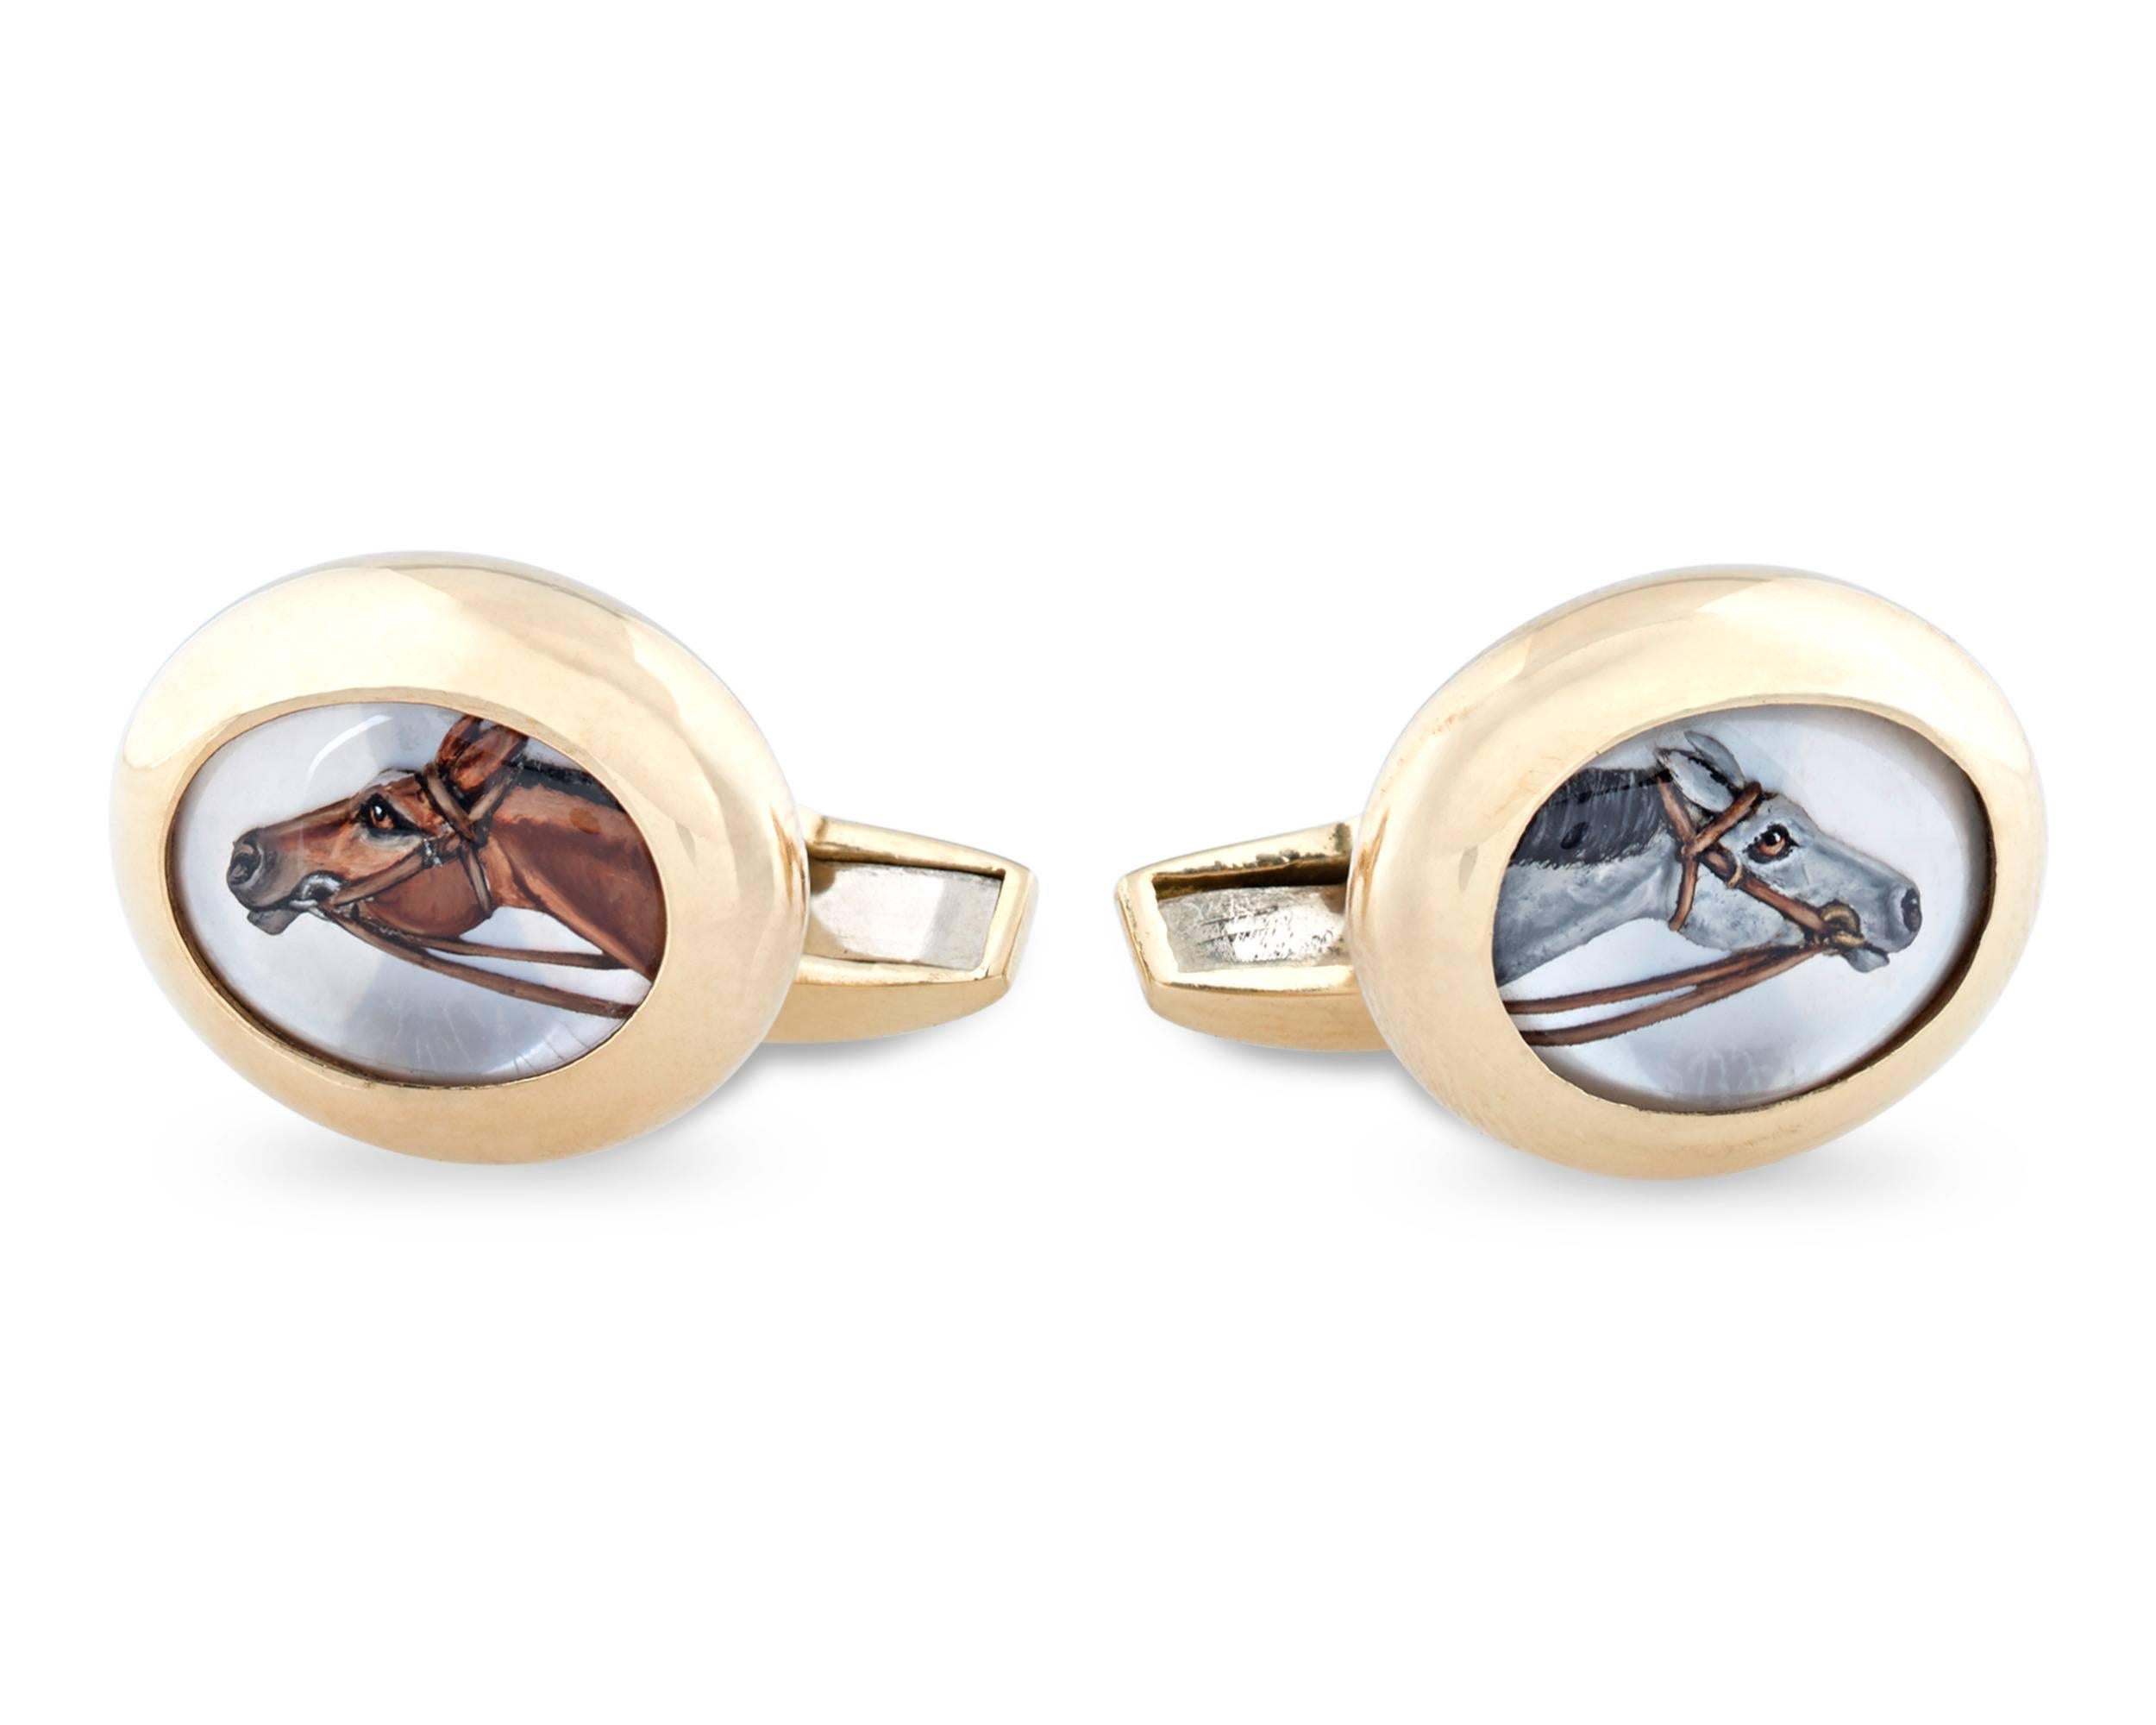 The beautifully hand-enameled likenesses of two race horses in the profile are visible through the Essex crystal set in these handsome cufflinks. Crafted in Birmingham, England, these cufflinks are the perfect accessories for the equine